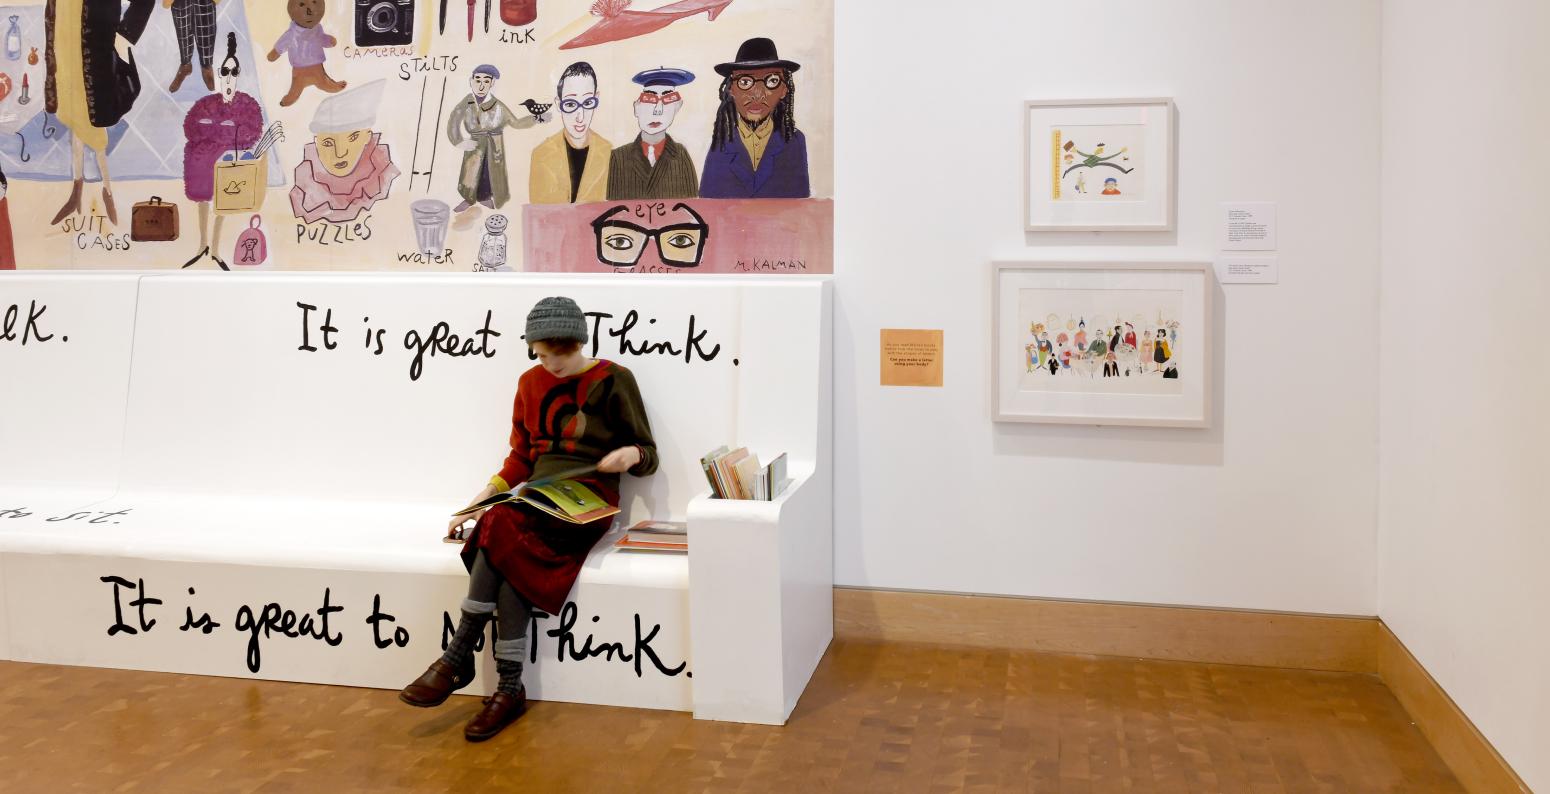 Installation image from Maira Kalman exhibition showing bench painted with text "It is great to think."